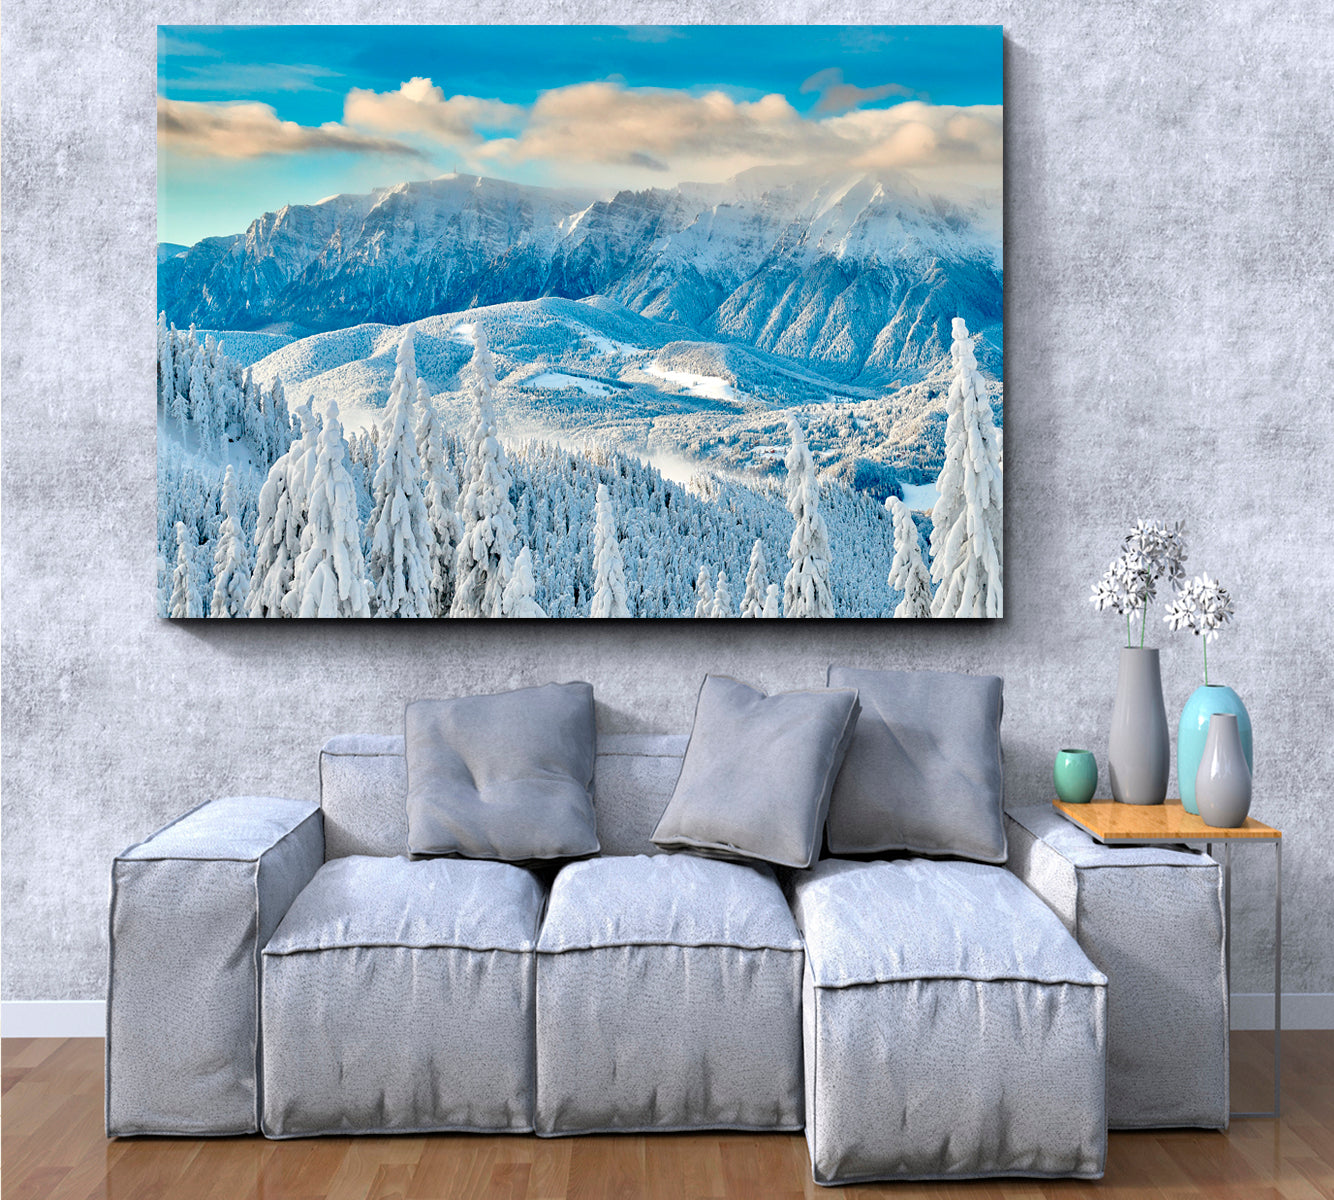 Mountain Winter Landscape Over The Ski Slope Panoramic View Poster Scenery Landscape Fine Art Print Artesty 1 panel 24" x 16" 